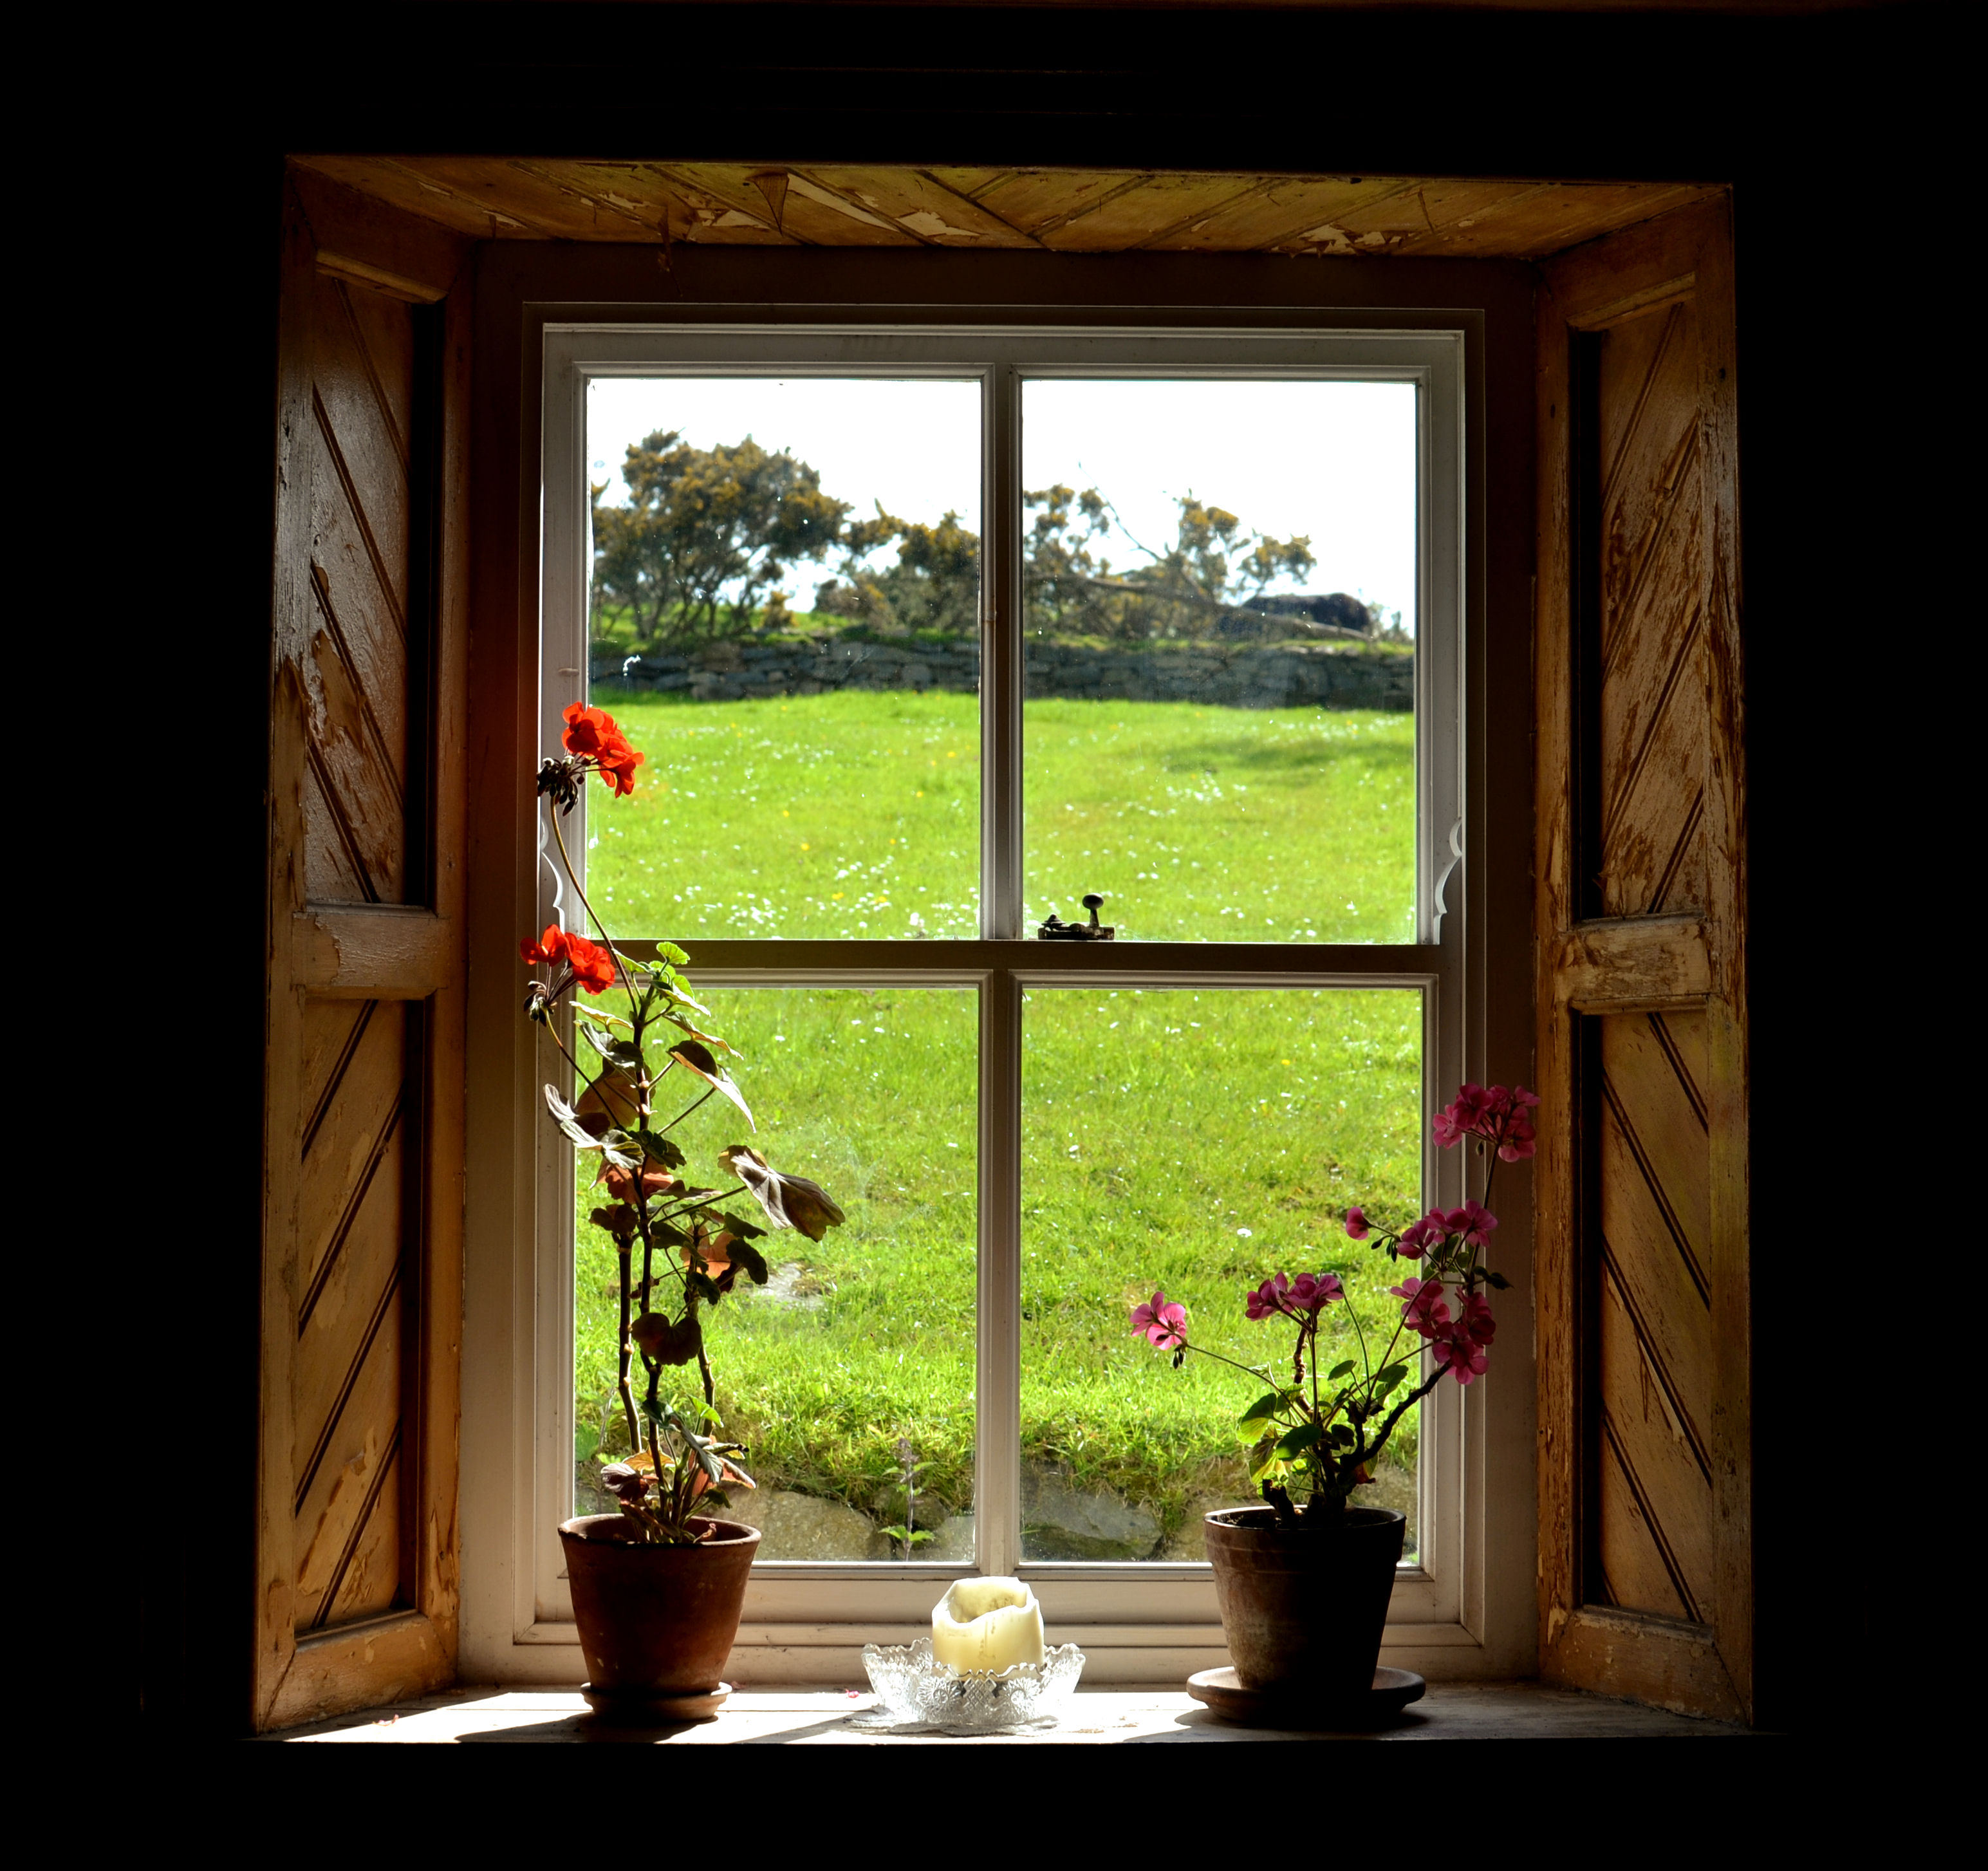 Composure through the window … – Photo's by David Roulston